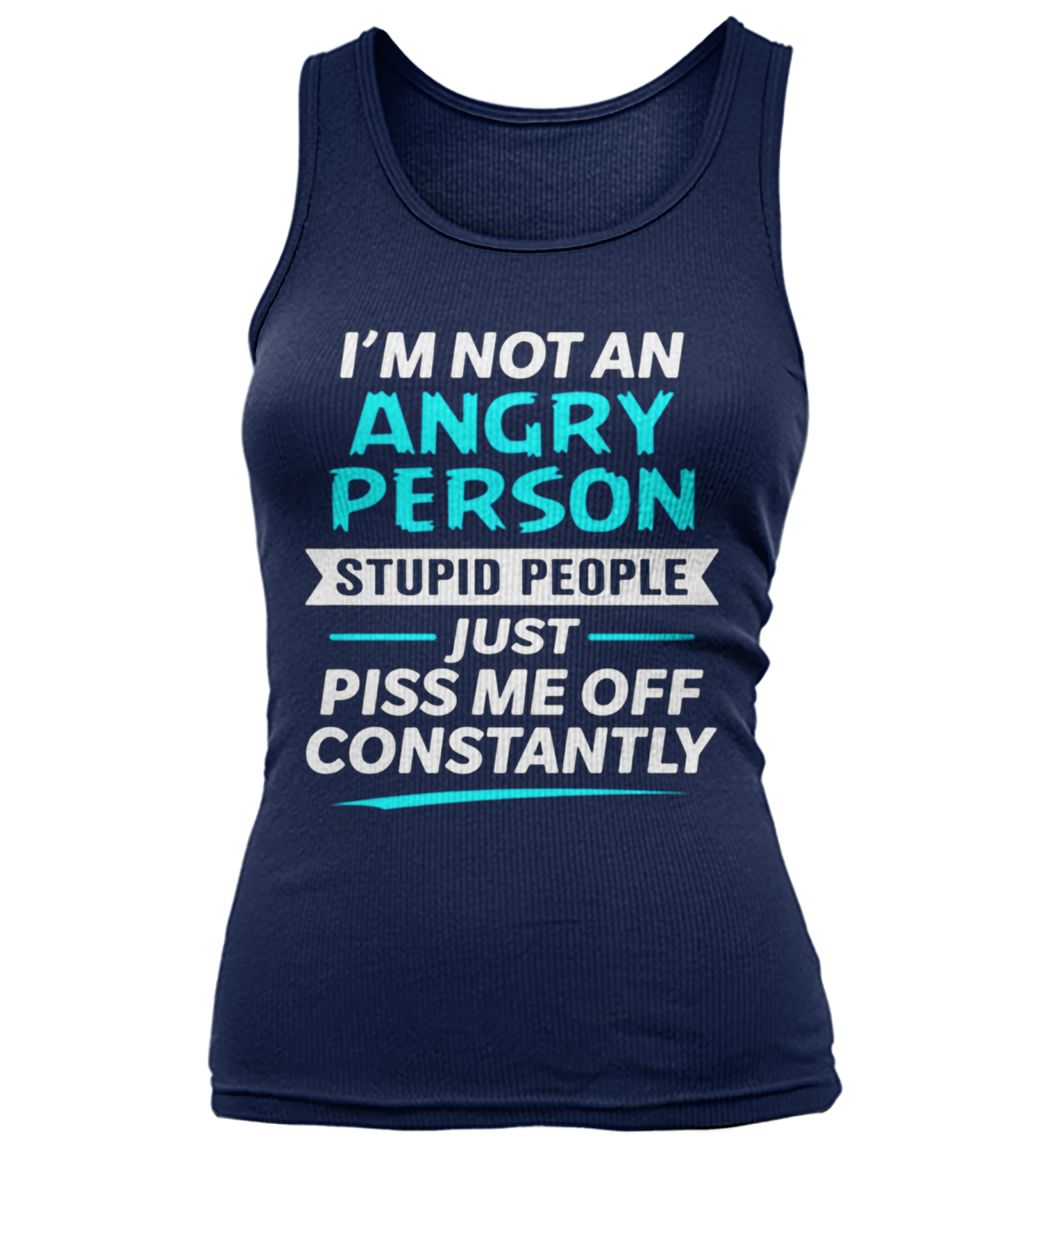 I’m not an angry person stupid people just piss me off constantly women's tank top